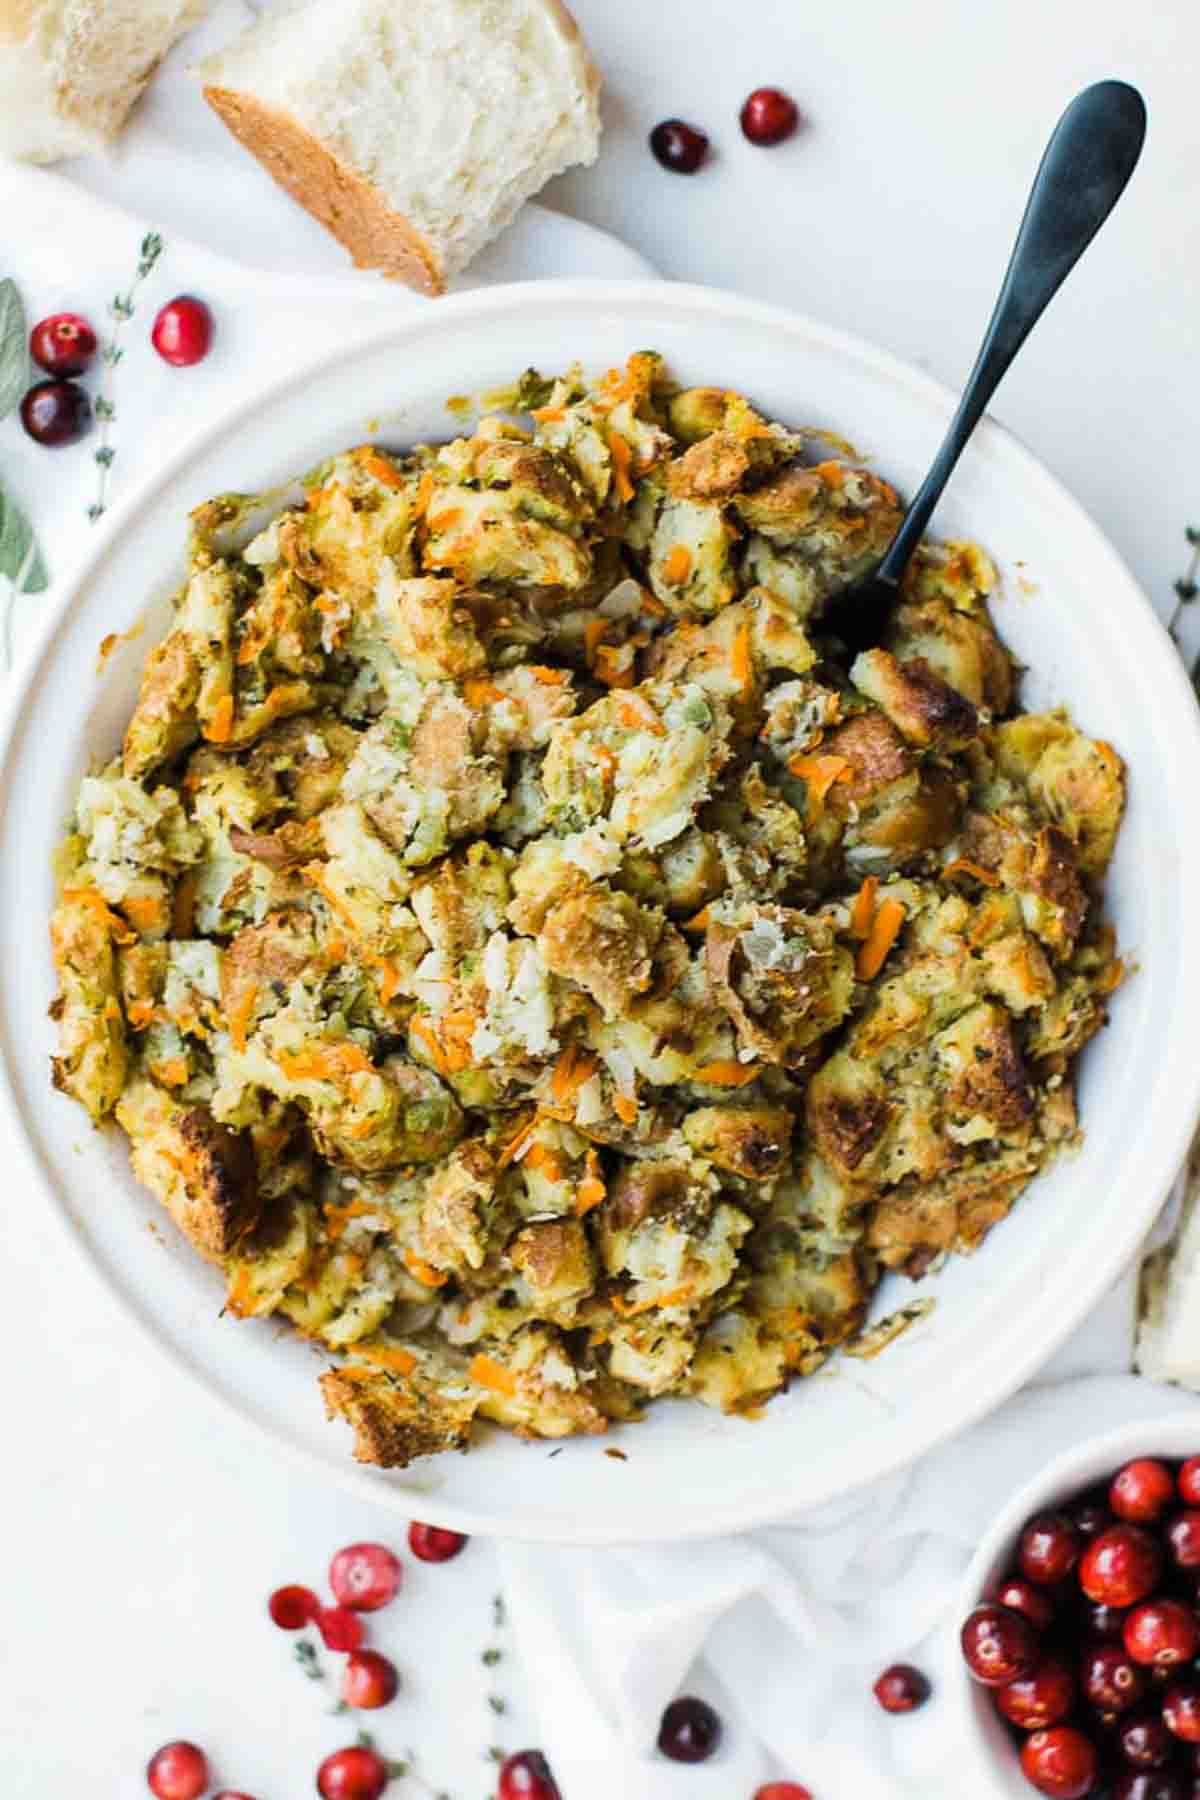 Big bowl of delicious flavorful homemade stuffing.